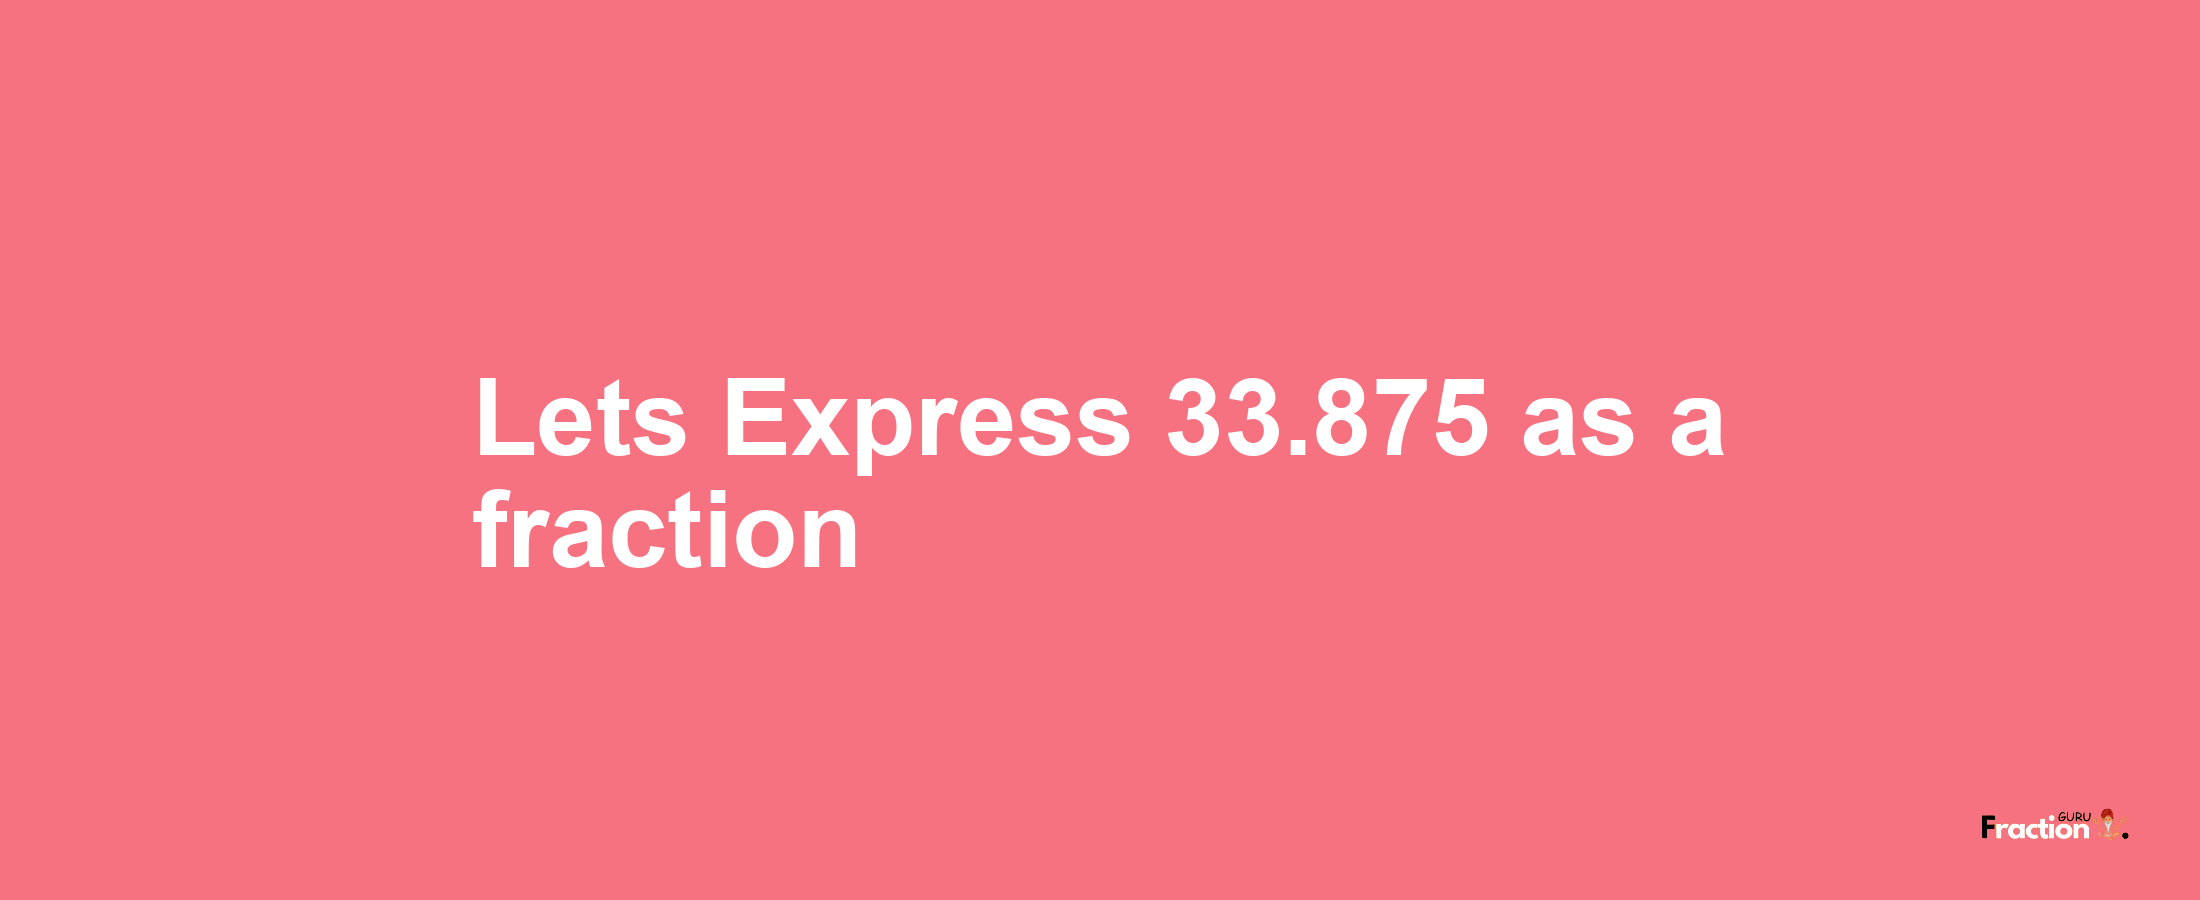 Lets Express 33.875 as afraction